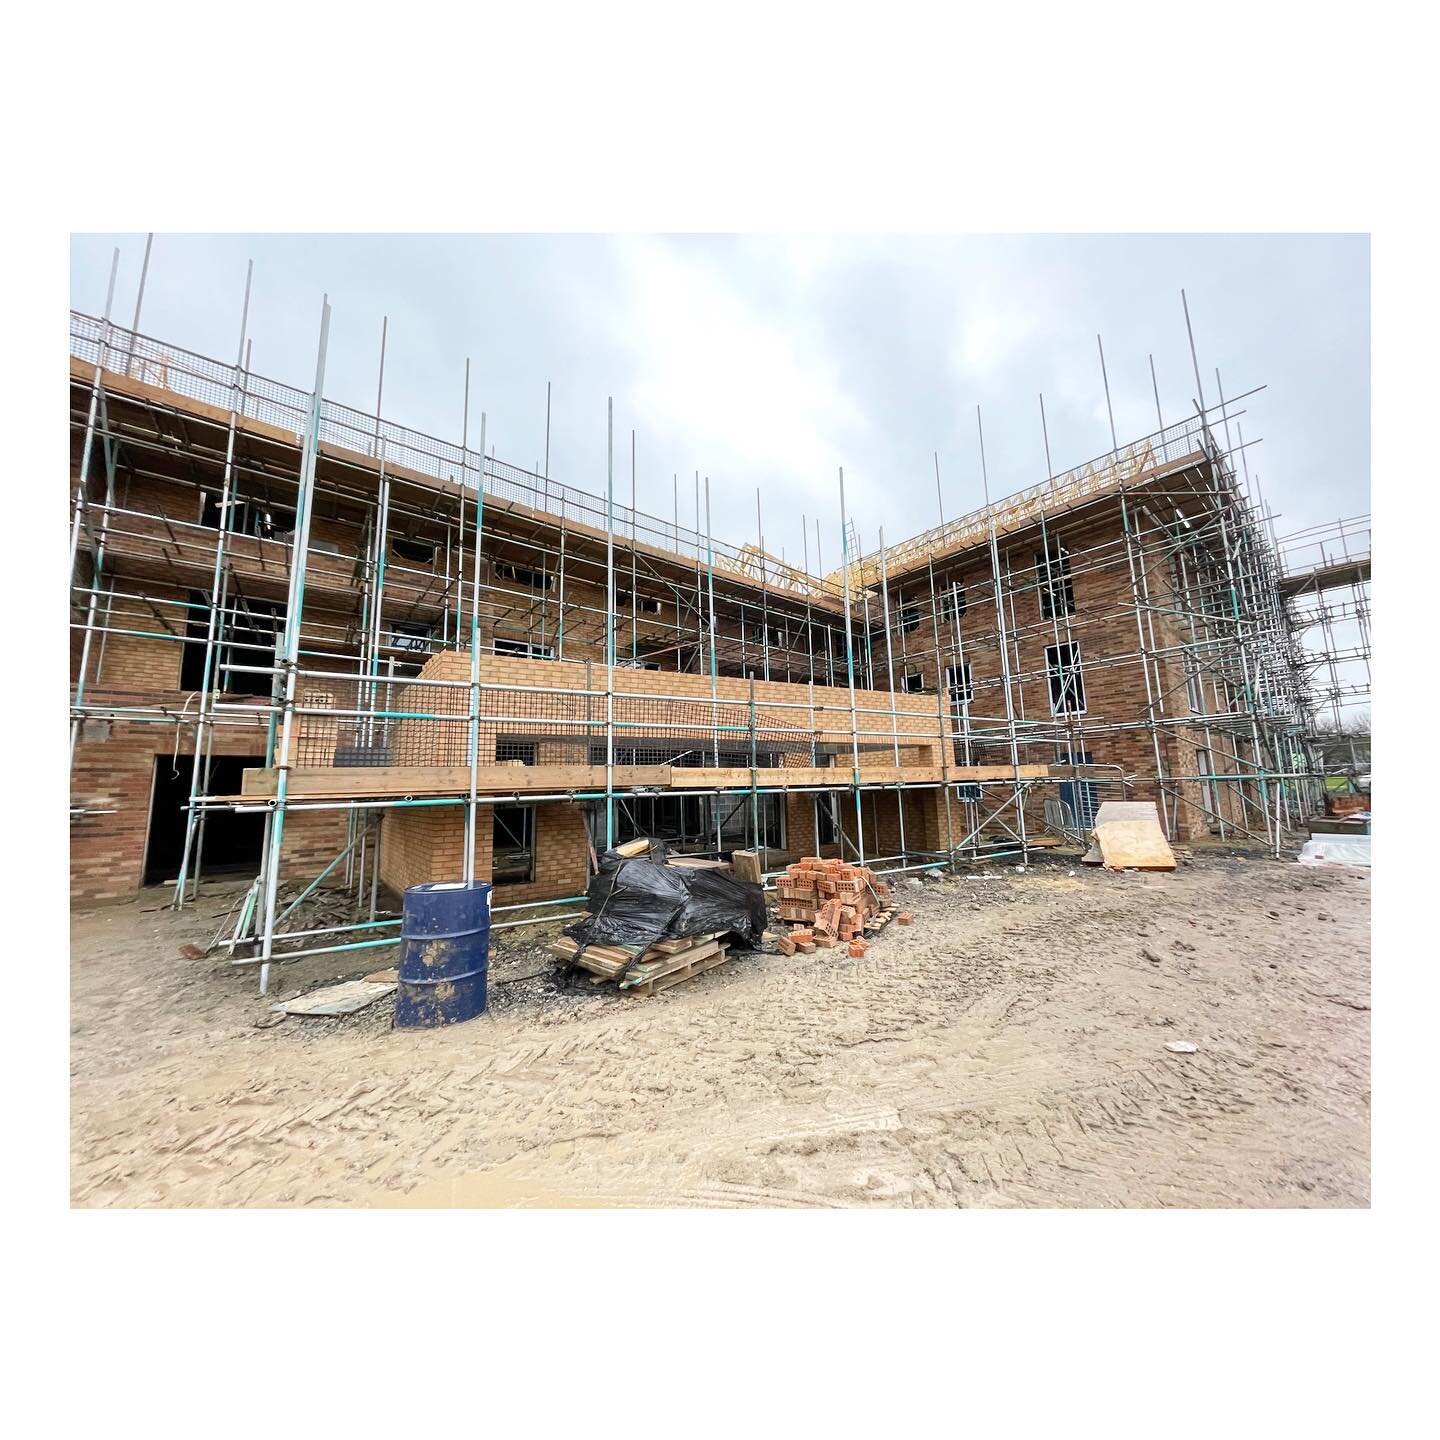 For day 4 of our Christmas countdown we have been on site visiting the Rosebrough Later Living Development in Cramlington for Bernicia and being constructed by Tolent Living. This 60 unit development will be completed for Q3 2021. 

Visit IDPartnersh